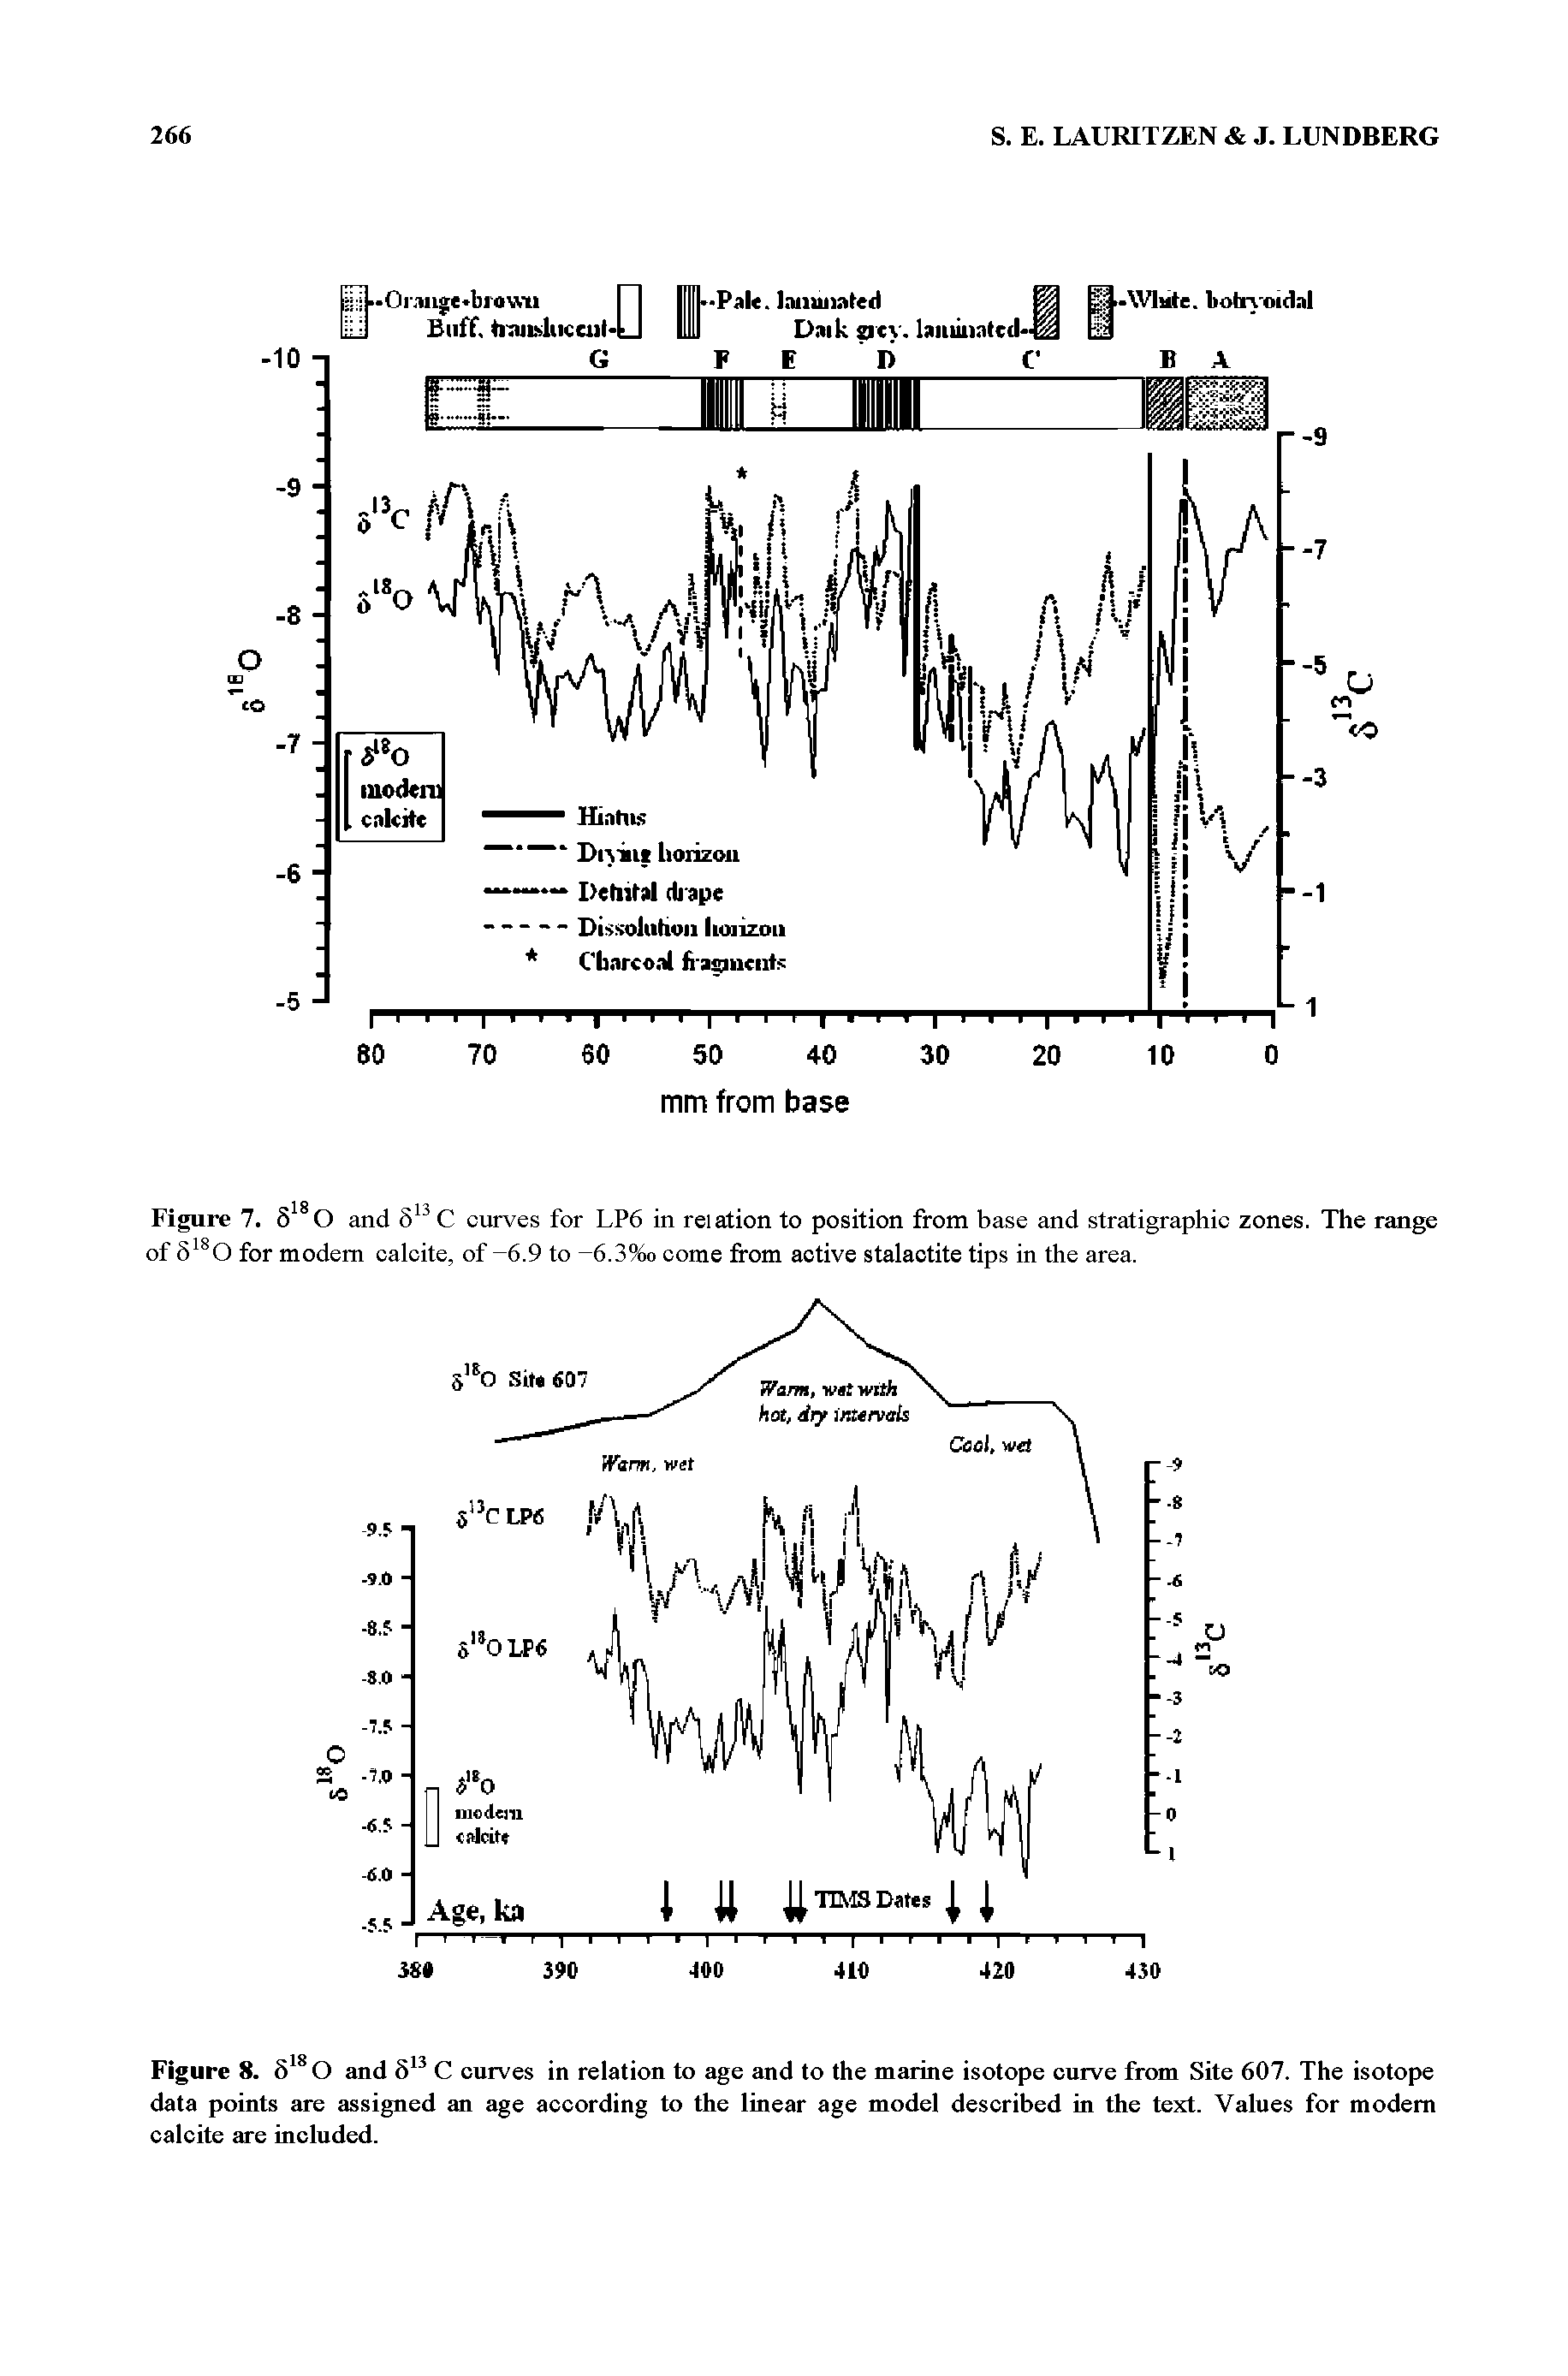 Figure 8. 6 O and 6 C curves in relation to age and to the marine isotope curve from Site 607. The isotope data points are assigned aa age according to the linear age model described in the text. Values for modem calcite m e included.